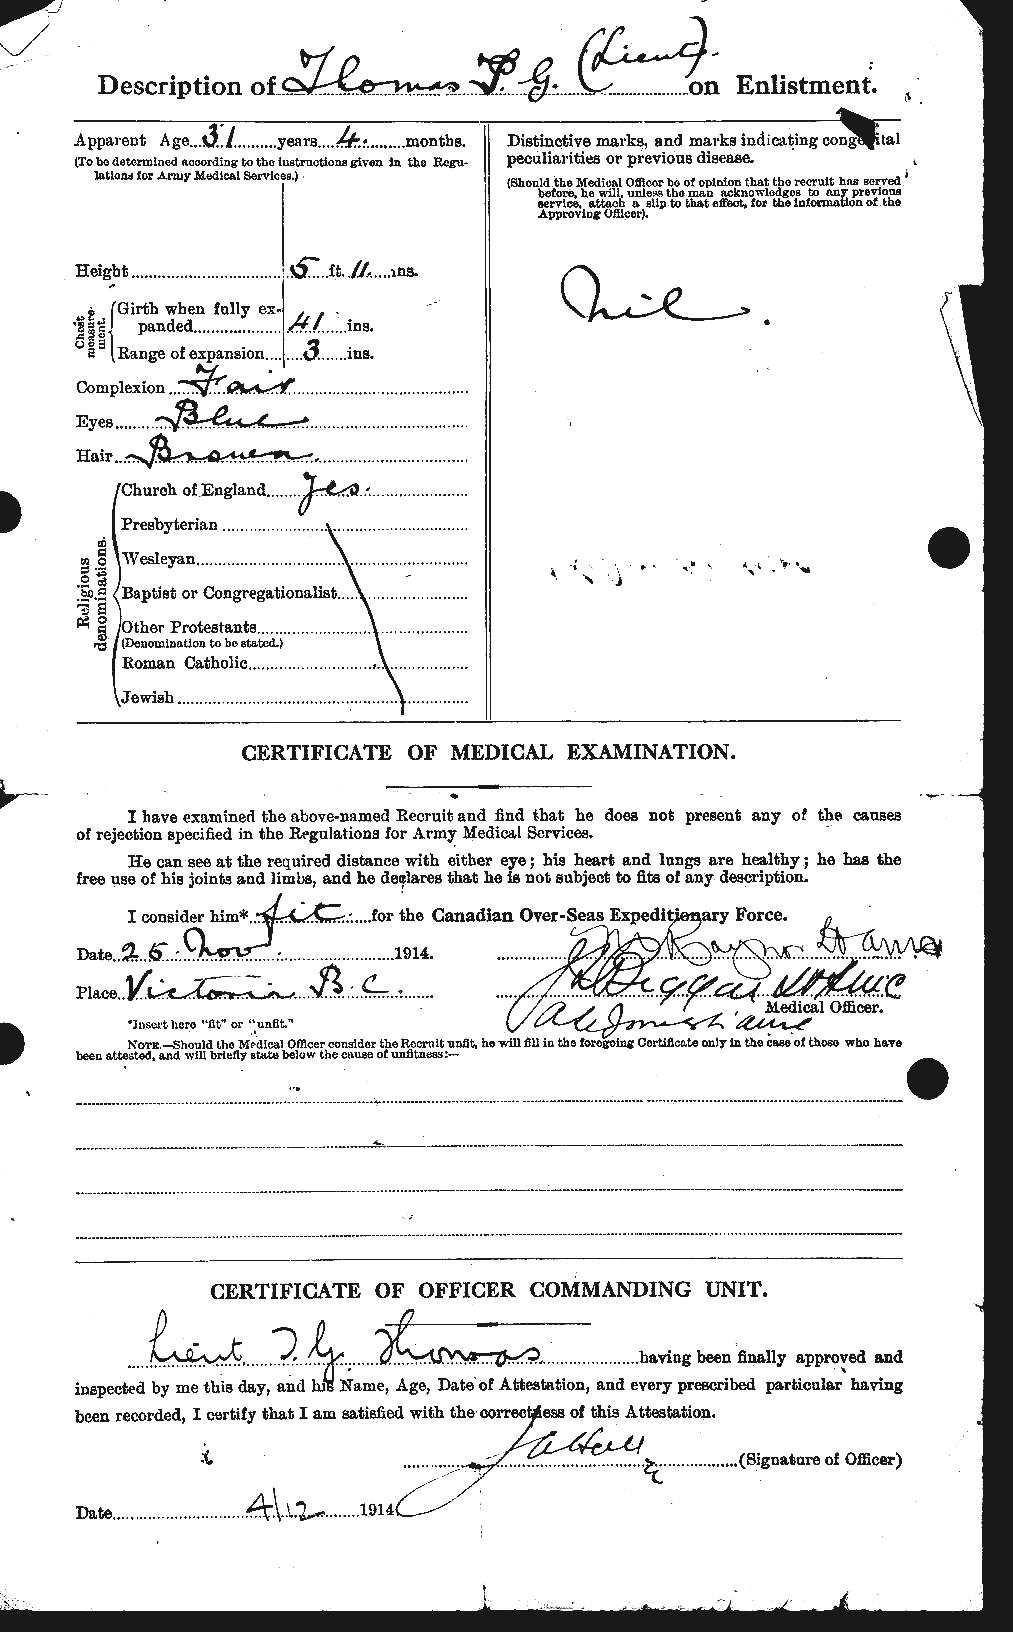 Personnel Records of the First World War - CEF 632694b